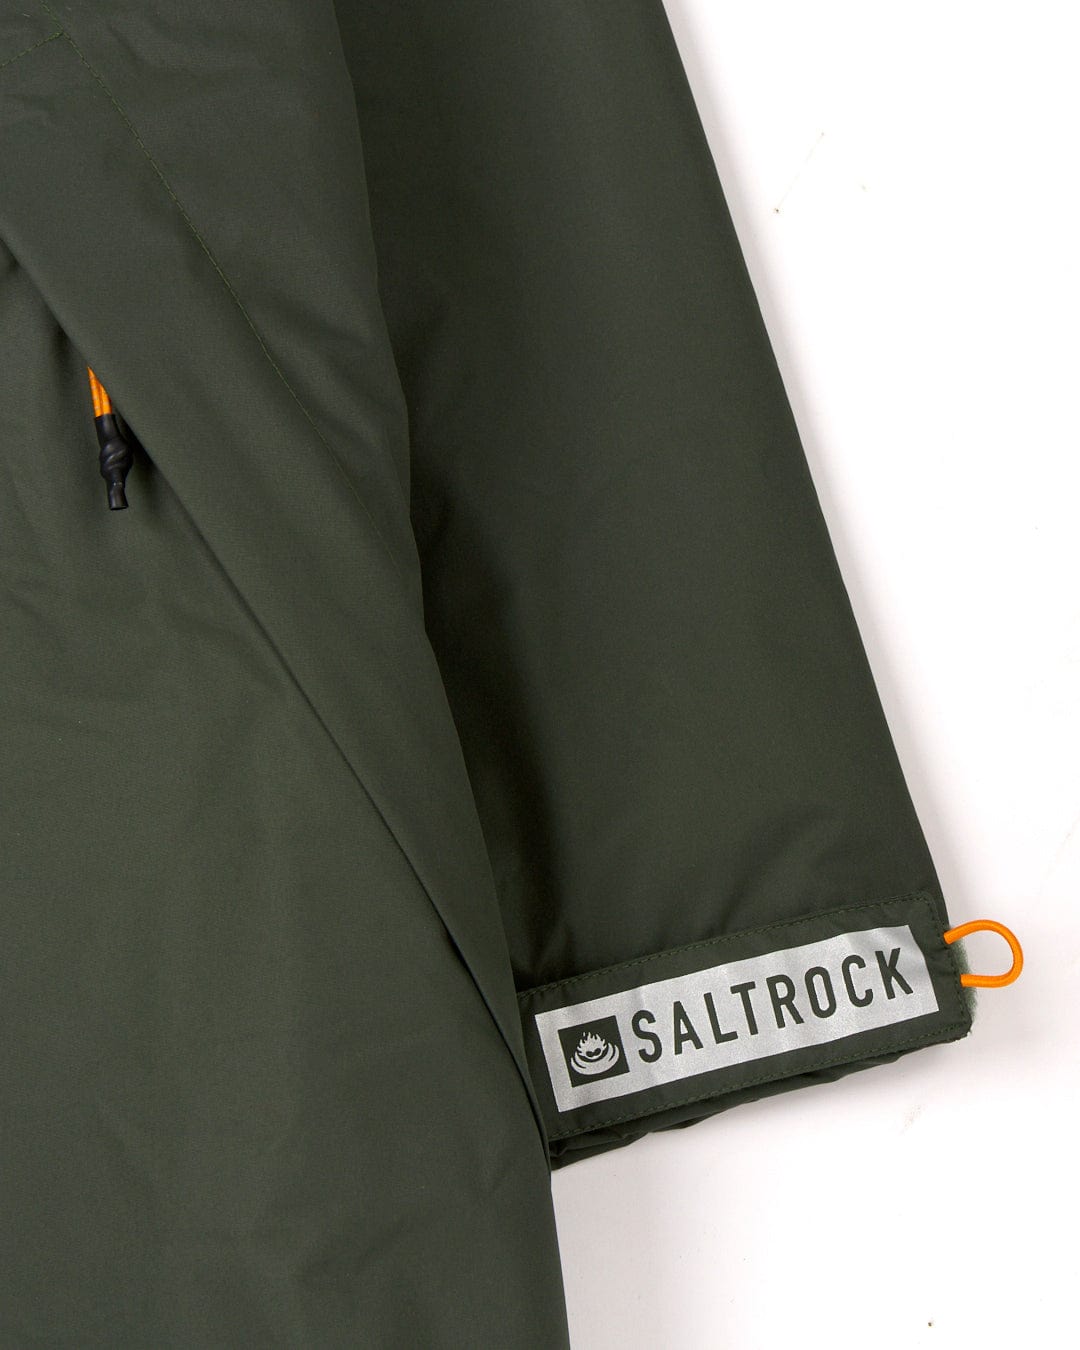 Saltrock green recycled Four Seasons changing robe with Aztec design and brand label visible.